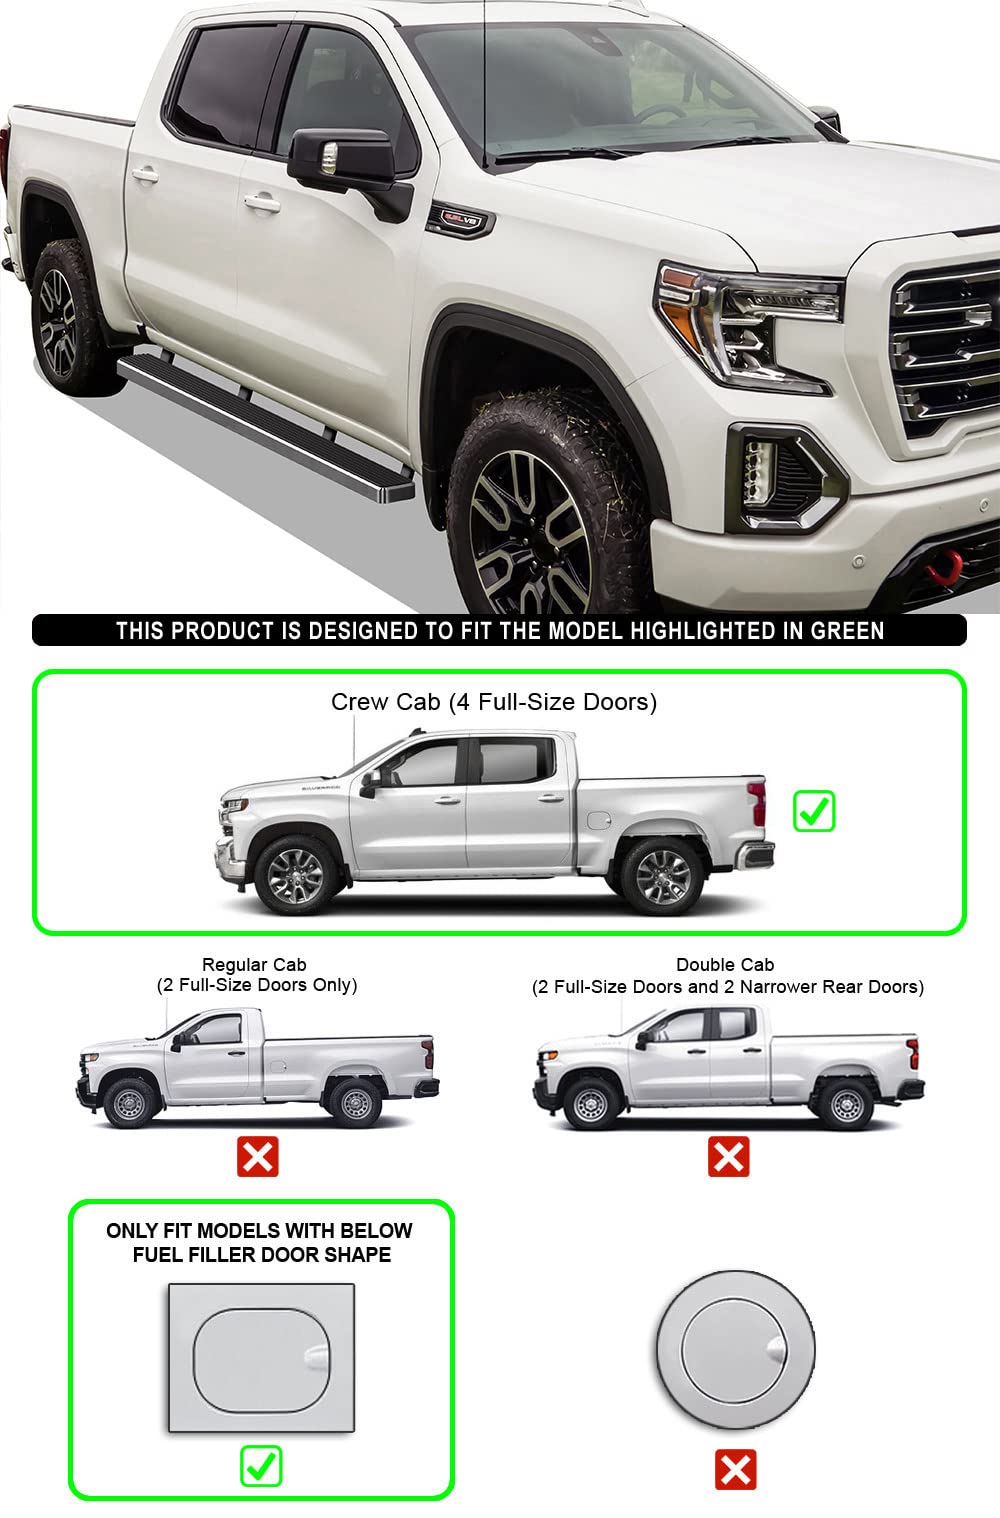 APS Premium 5in Stainless Steel Running Boards Compatible with Chevy Silverado GMC Sierra Crew Cab 19-24